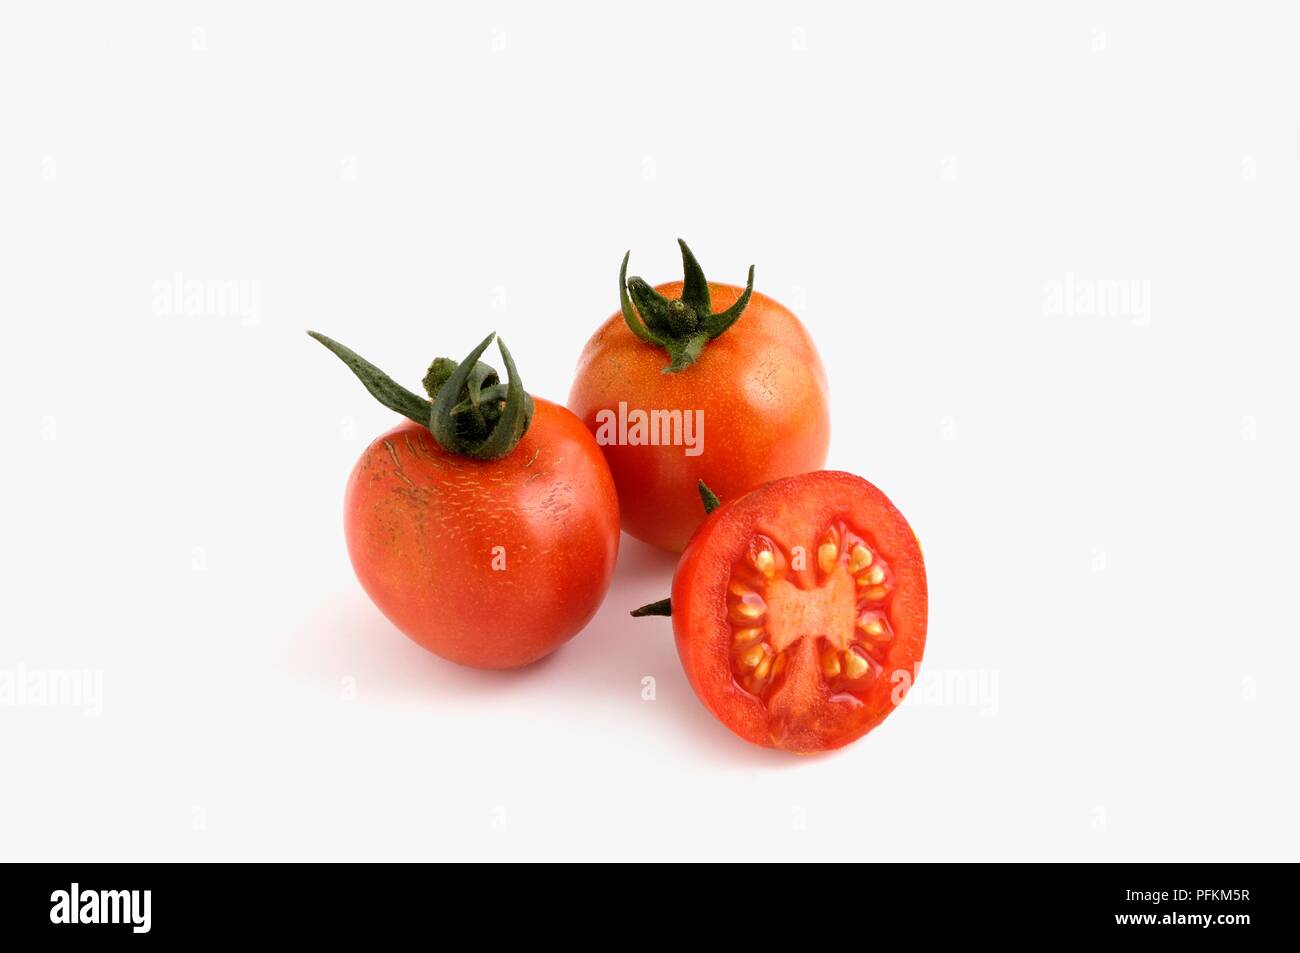 Whole and sliced German Gardener's Delight tomatoes Stock Photo